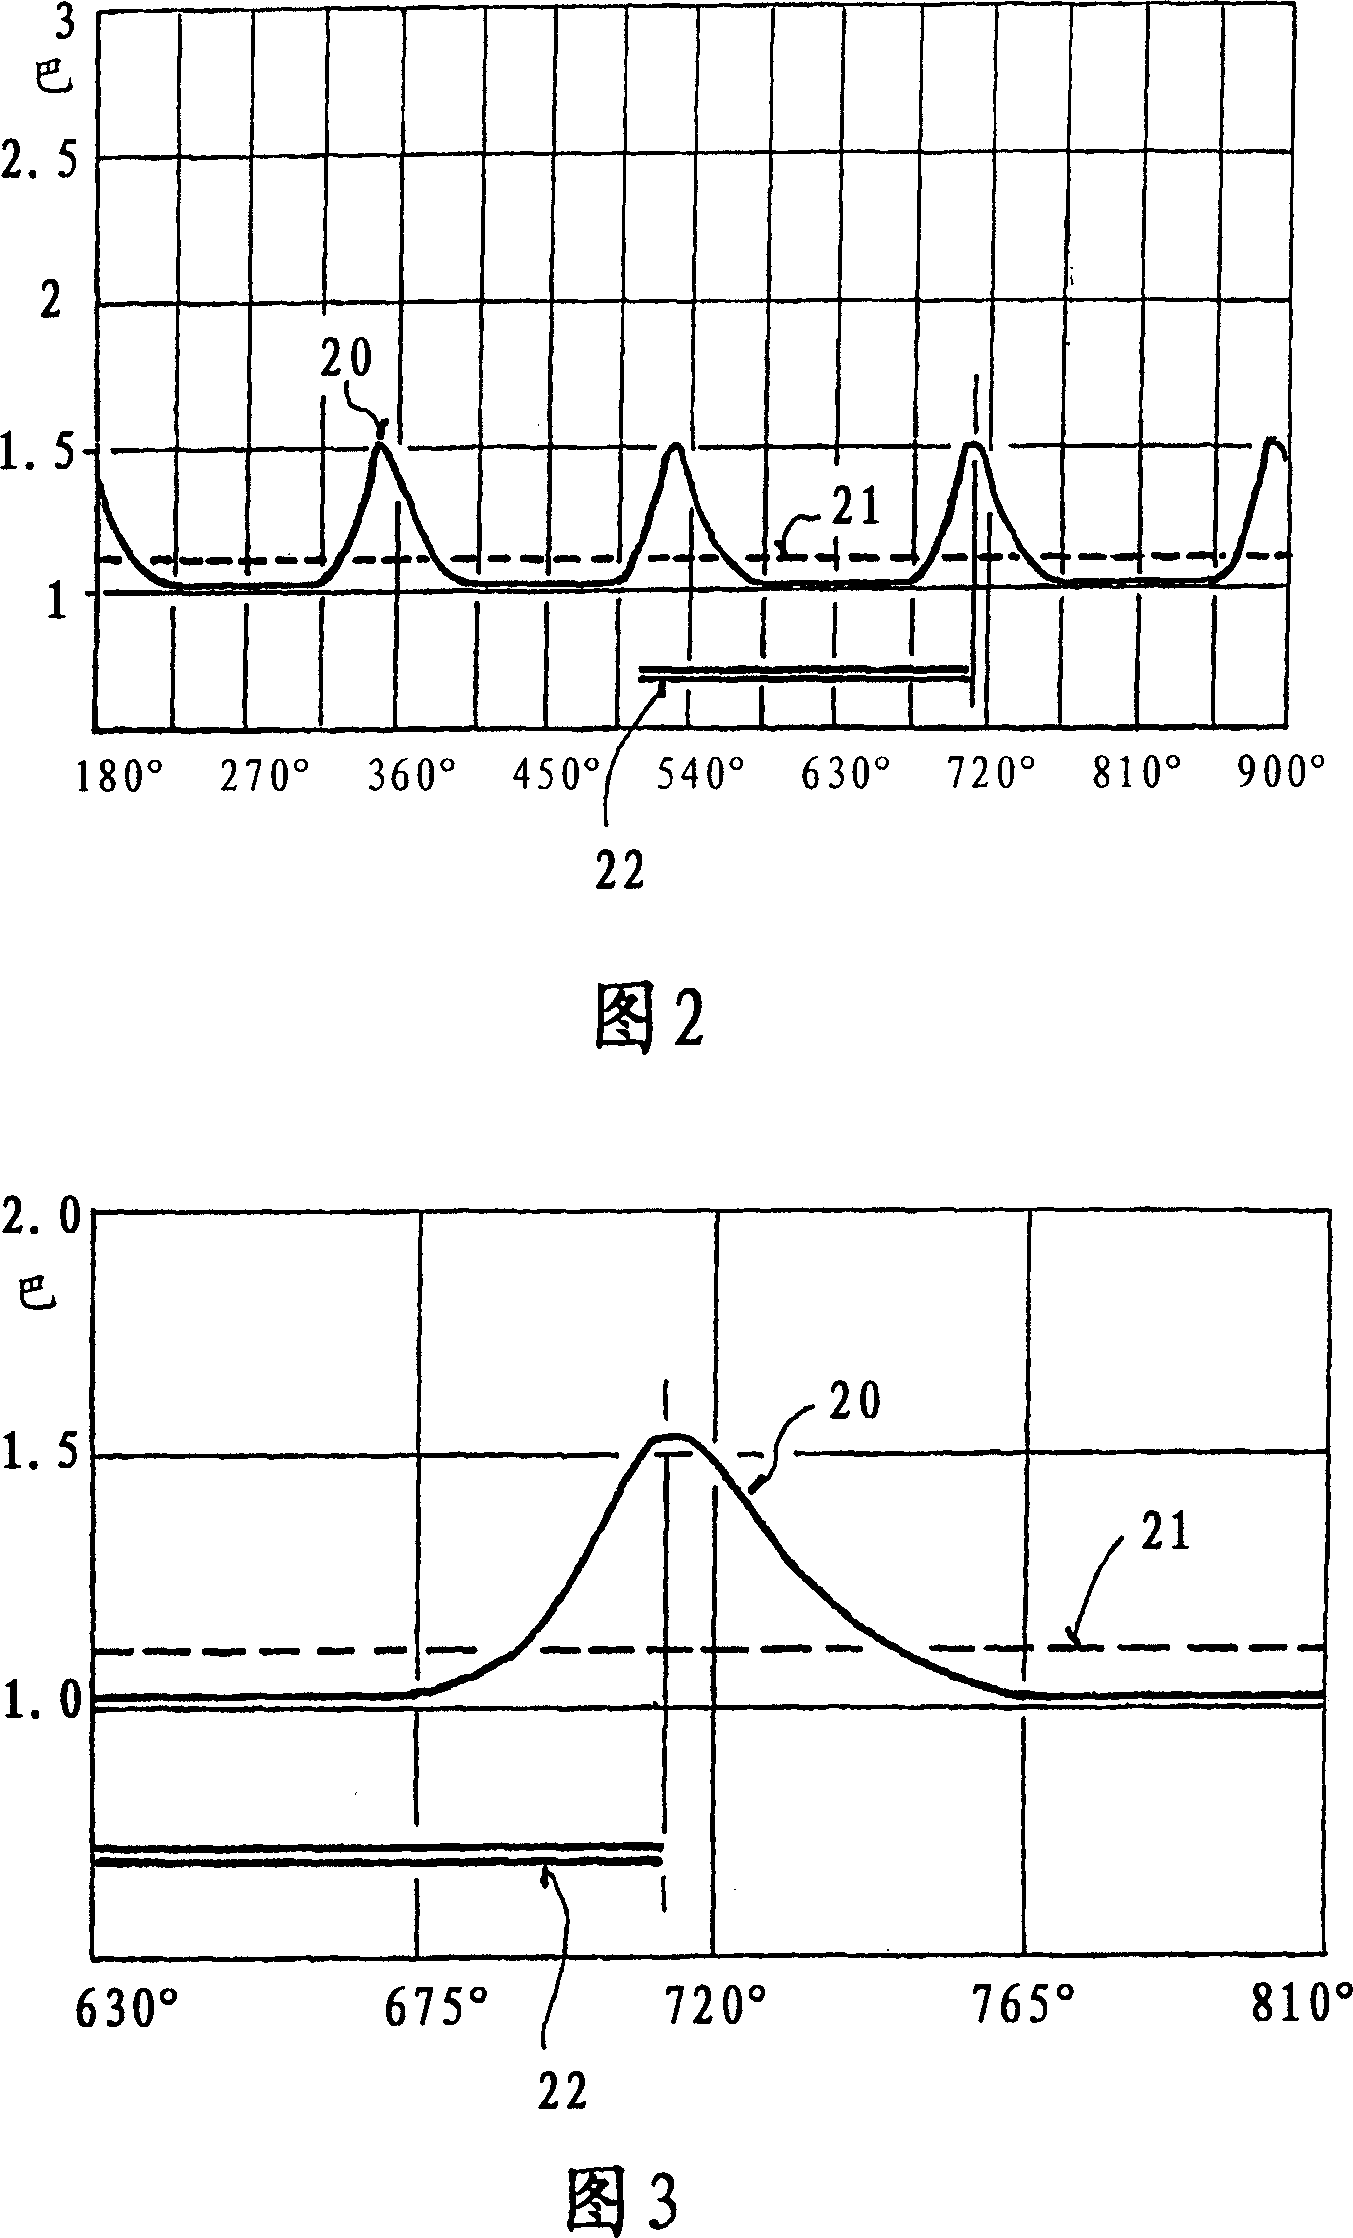 Method for operating an internal combustion engine, and internal combustion engine for carrying out said method